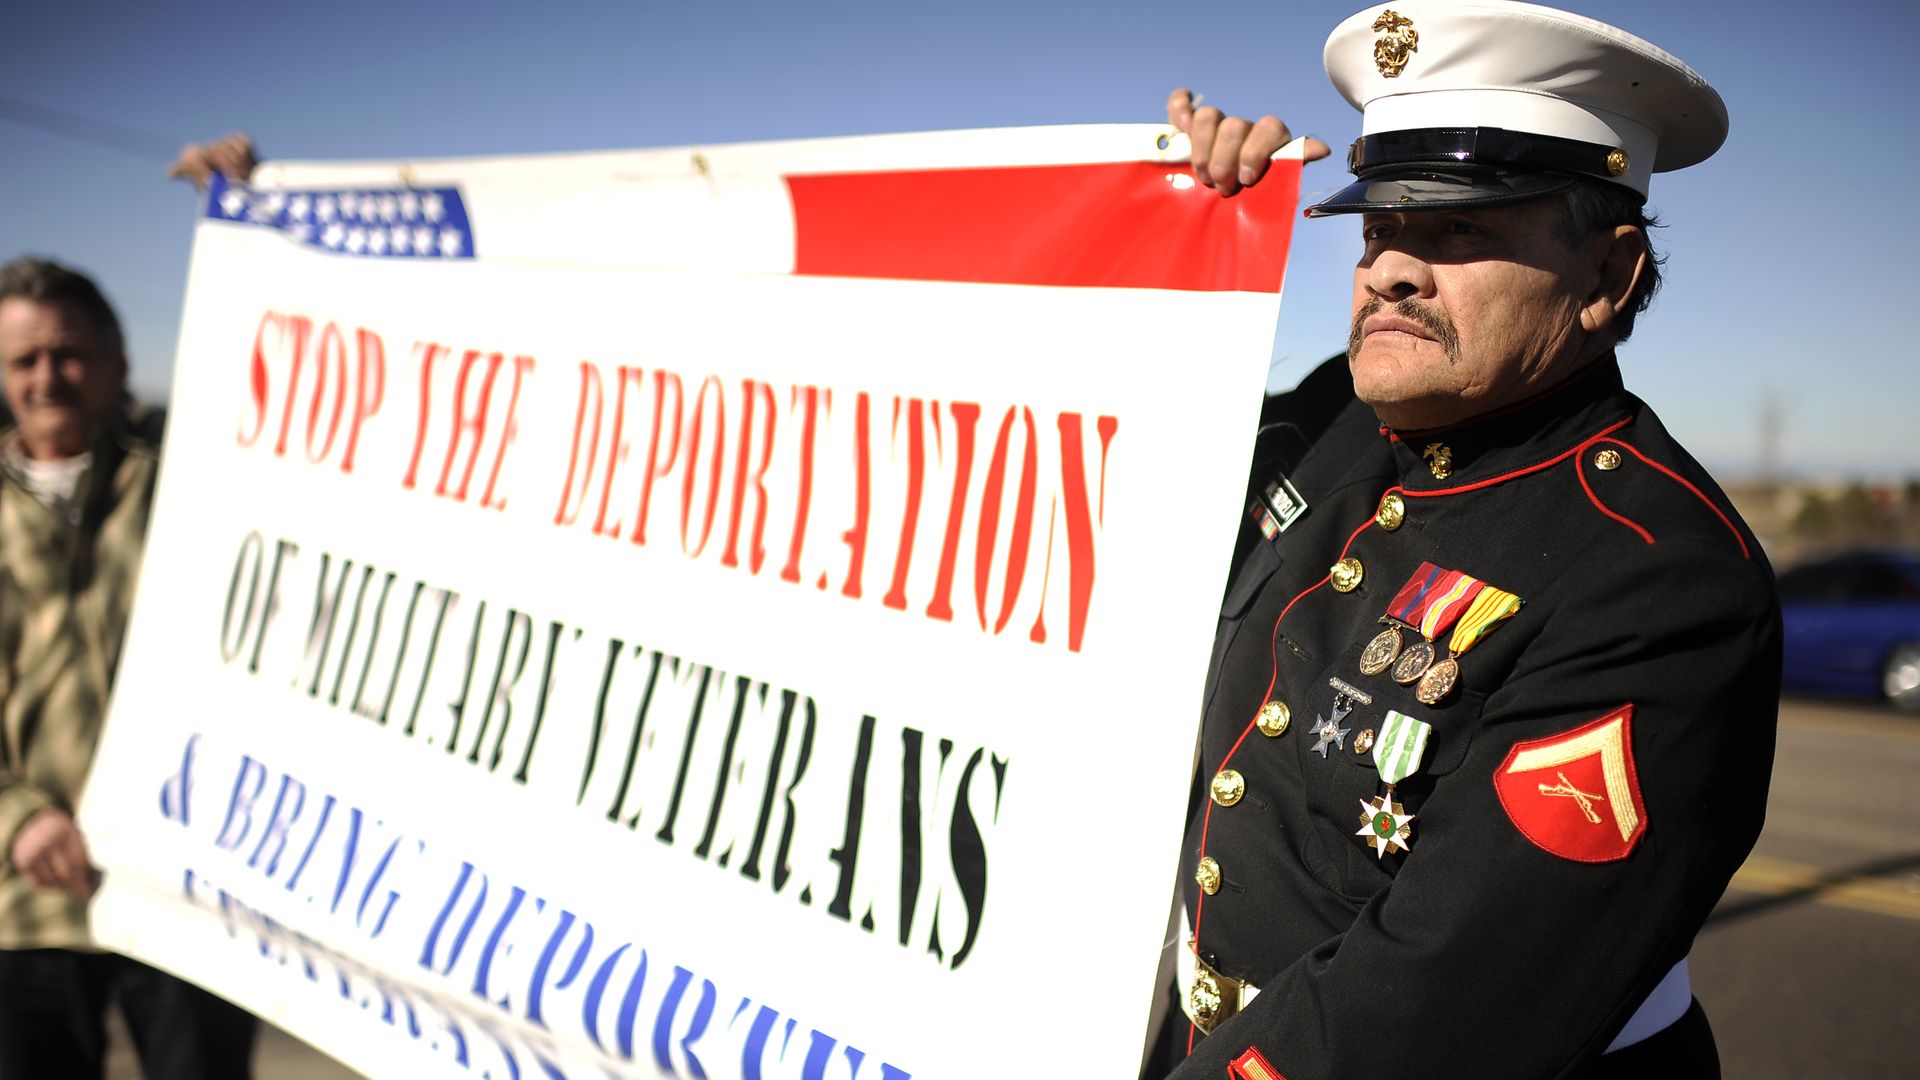 Retired U.S. Marine Manuel Valenzuela stands at the entrance of Buckley Air Force base in uniform and carrying a banner to protest the deportation of veterans.